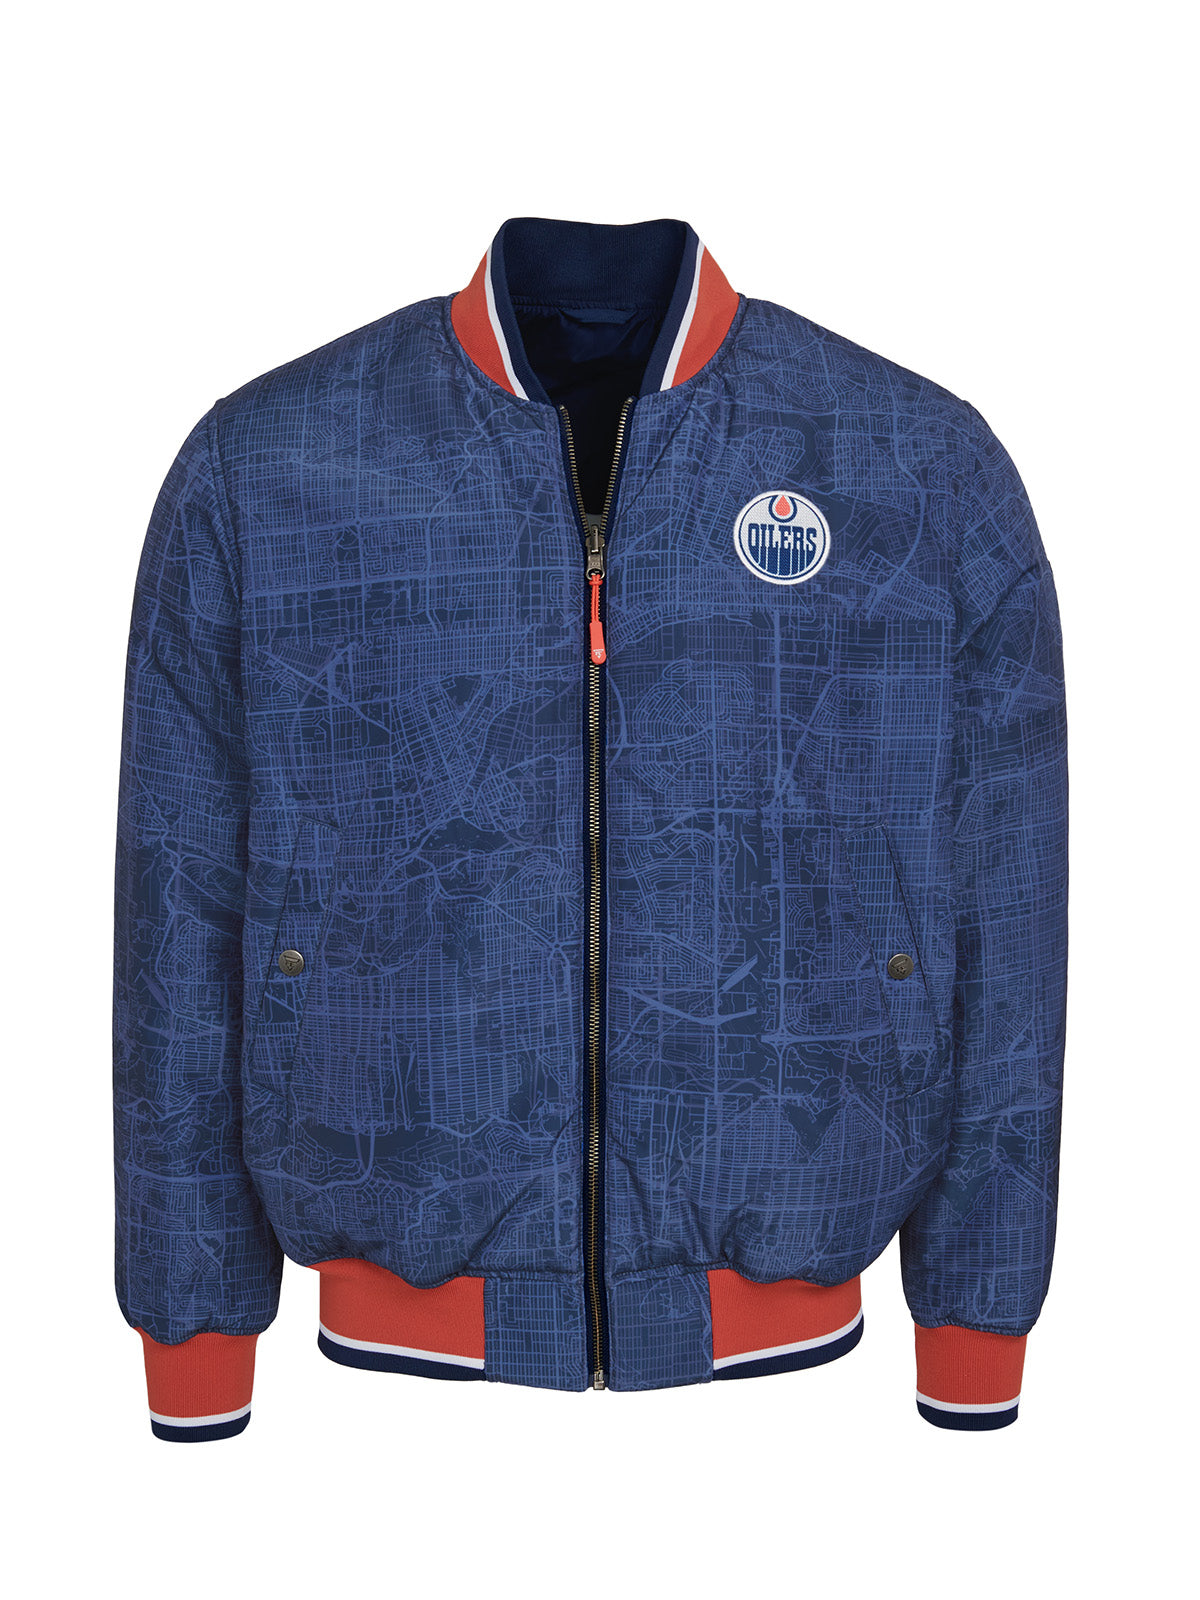 Edmonton Oilers Bomber - Reversible bomber jacket featuring the iconic Edmonton Oilers logo with ribbed cuffs, collar and hem in the team colors